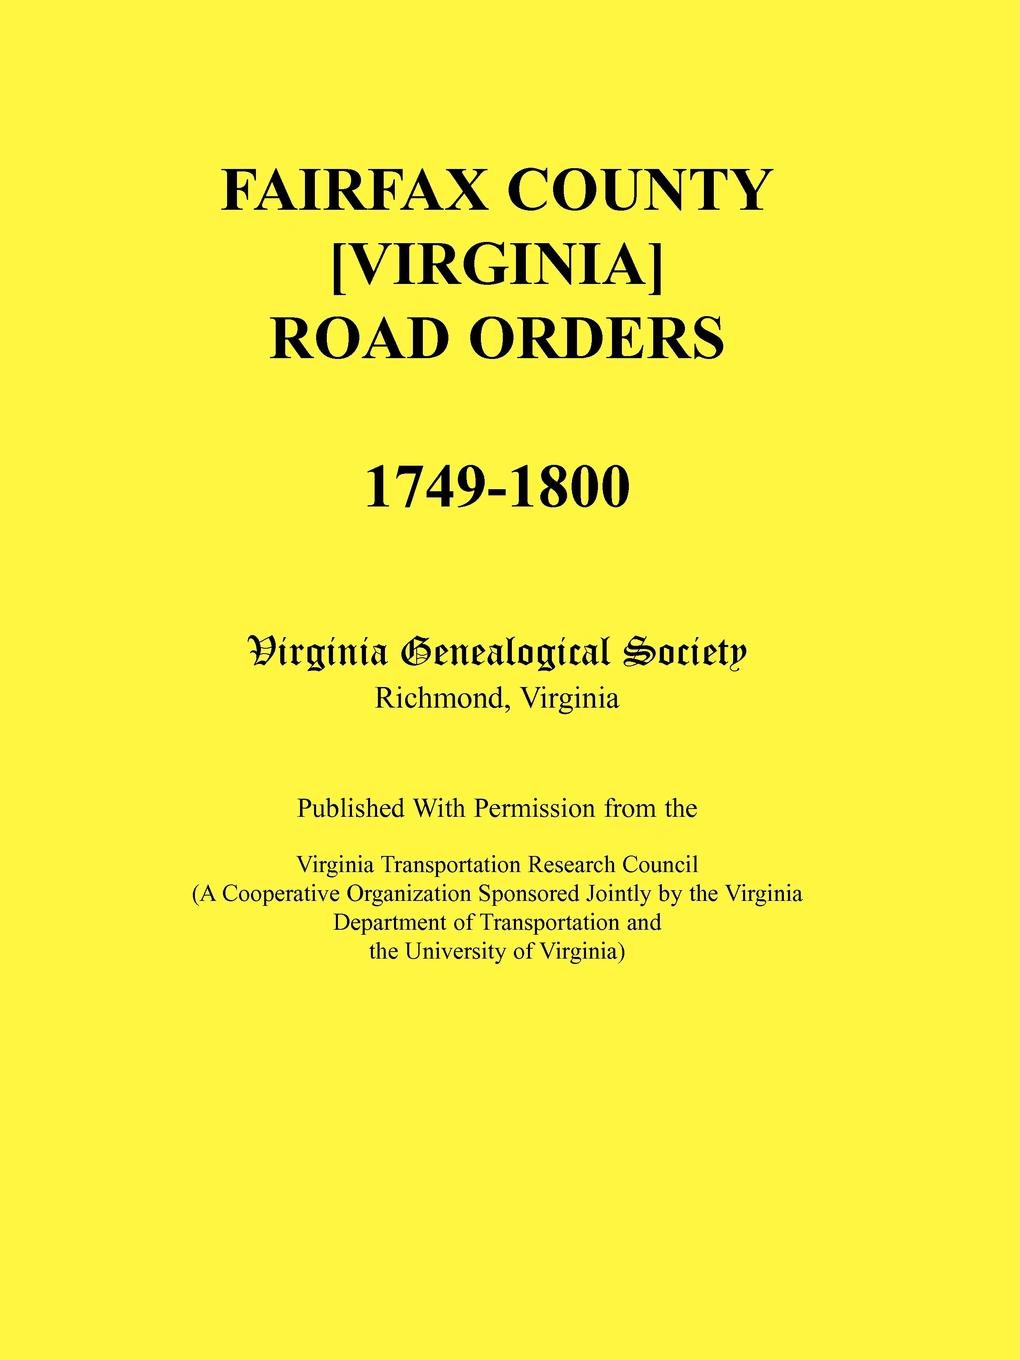 Fairfax County .Virginia. Road Orders, 1749-1800. Published With Permission from the Virginia Transportation Research Council (A Cooperative Organization Sponsored Jointly by the Virginia Department of Transportation and the University of Virginia)